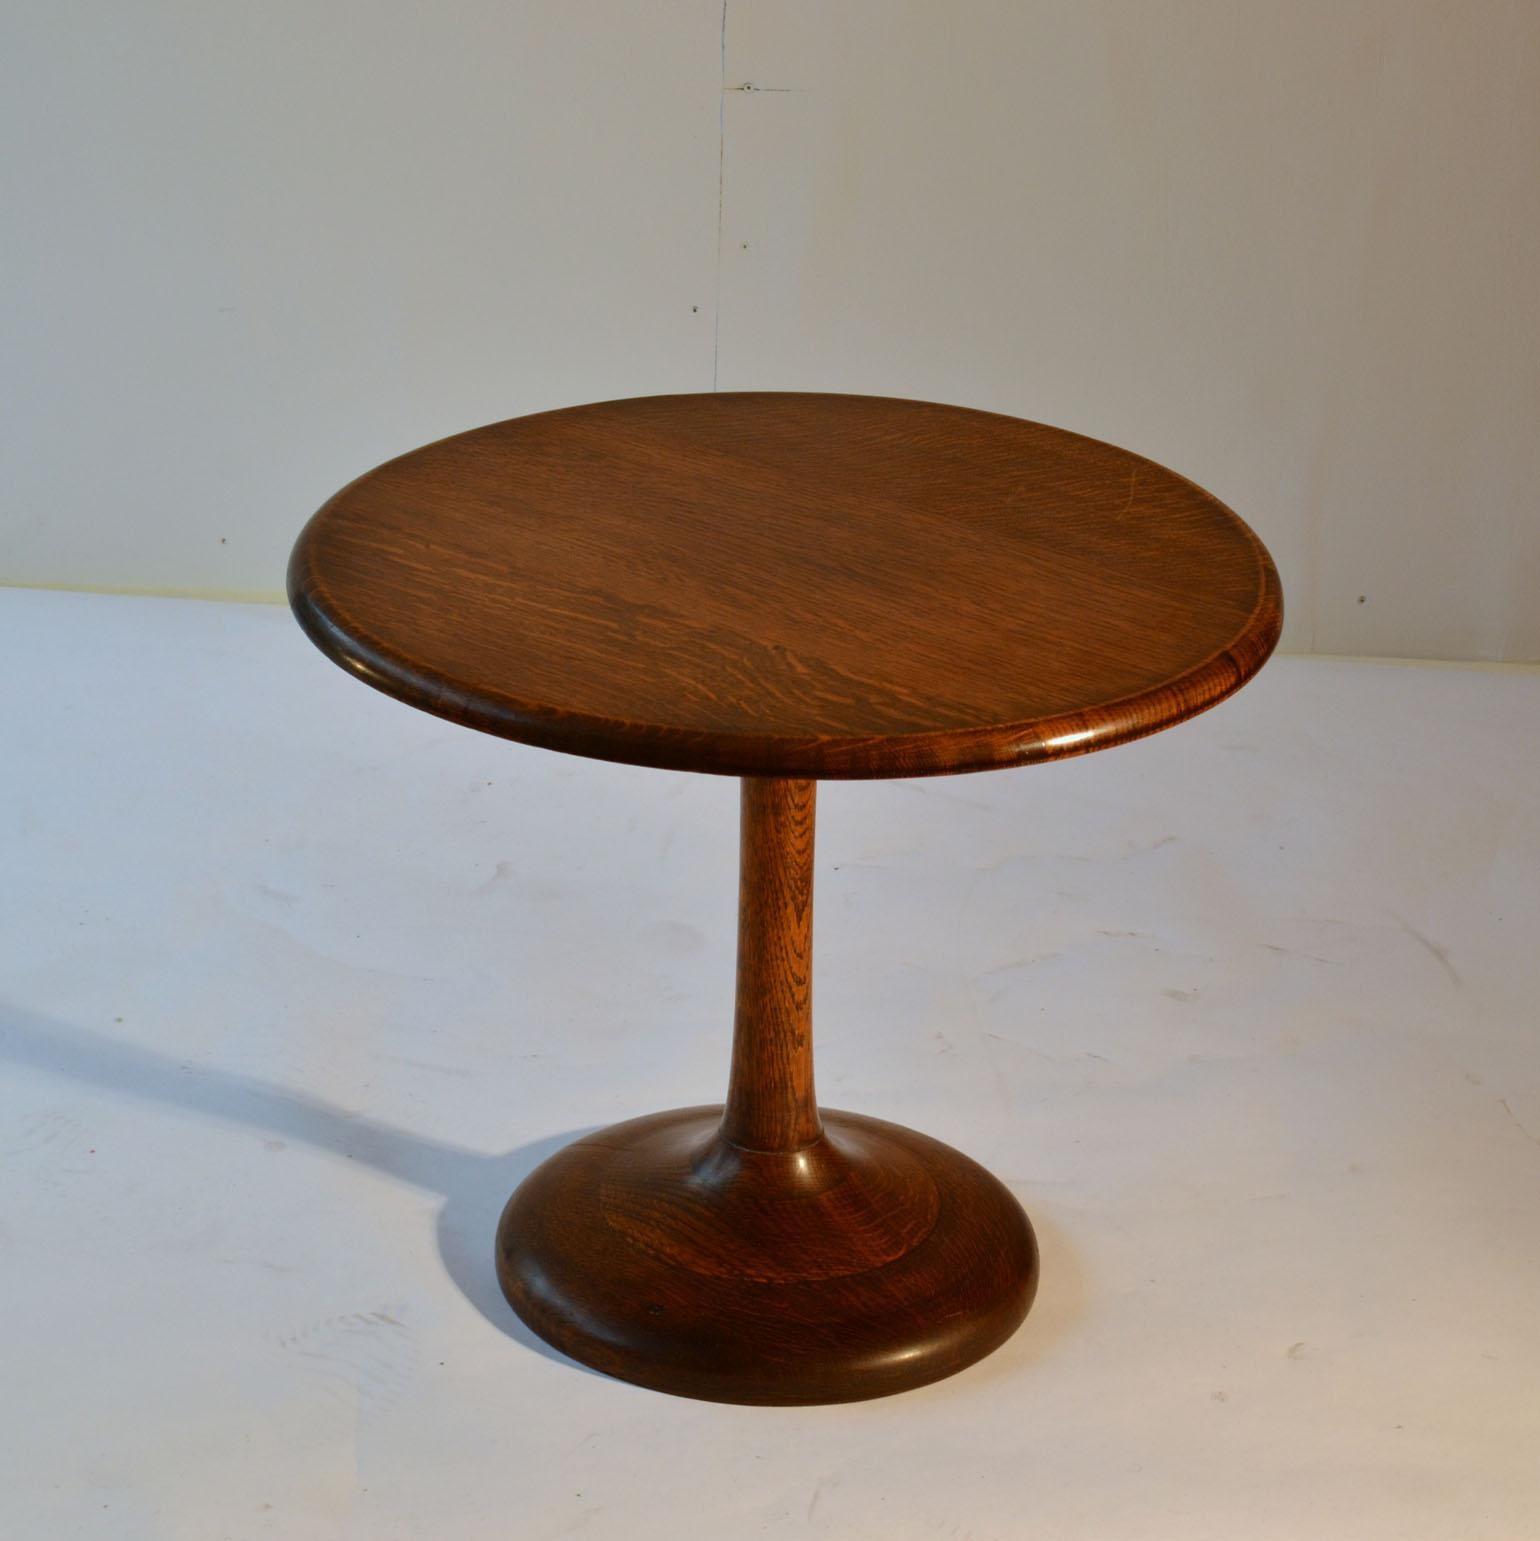 Occasional compact round side table in solid oak on tulip foot. The top has a smooth edge. The table has a polished finish and is in excellent condition.